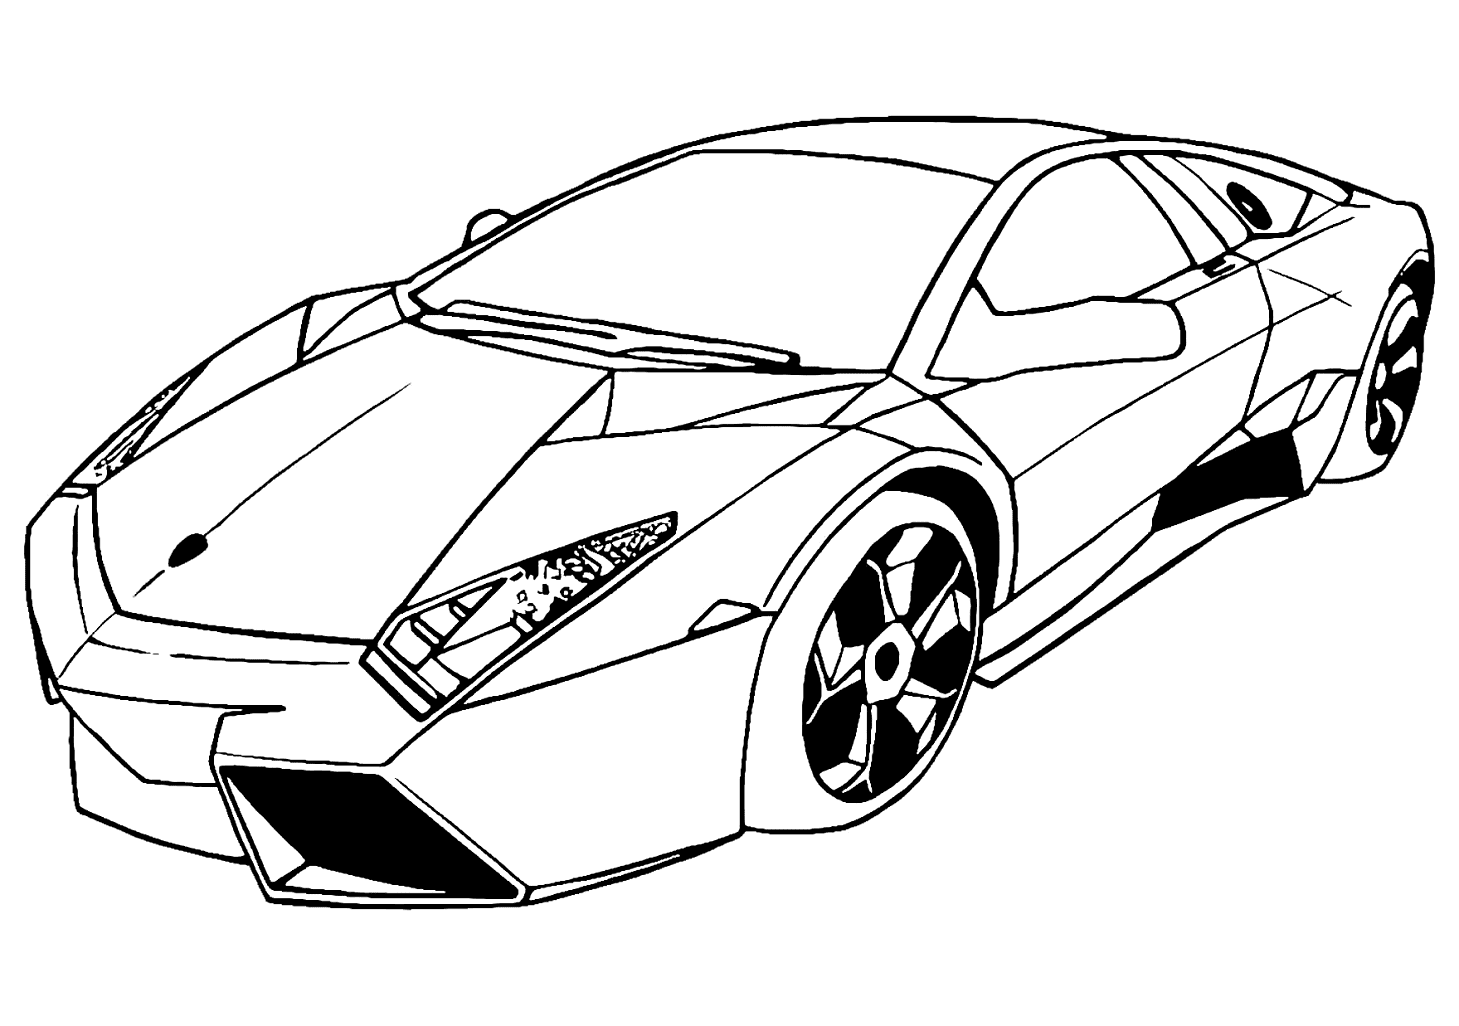 Racing Car Coloring Pages   Coloring Pages For Kids And Adults